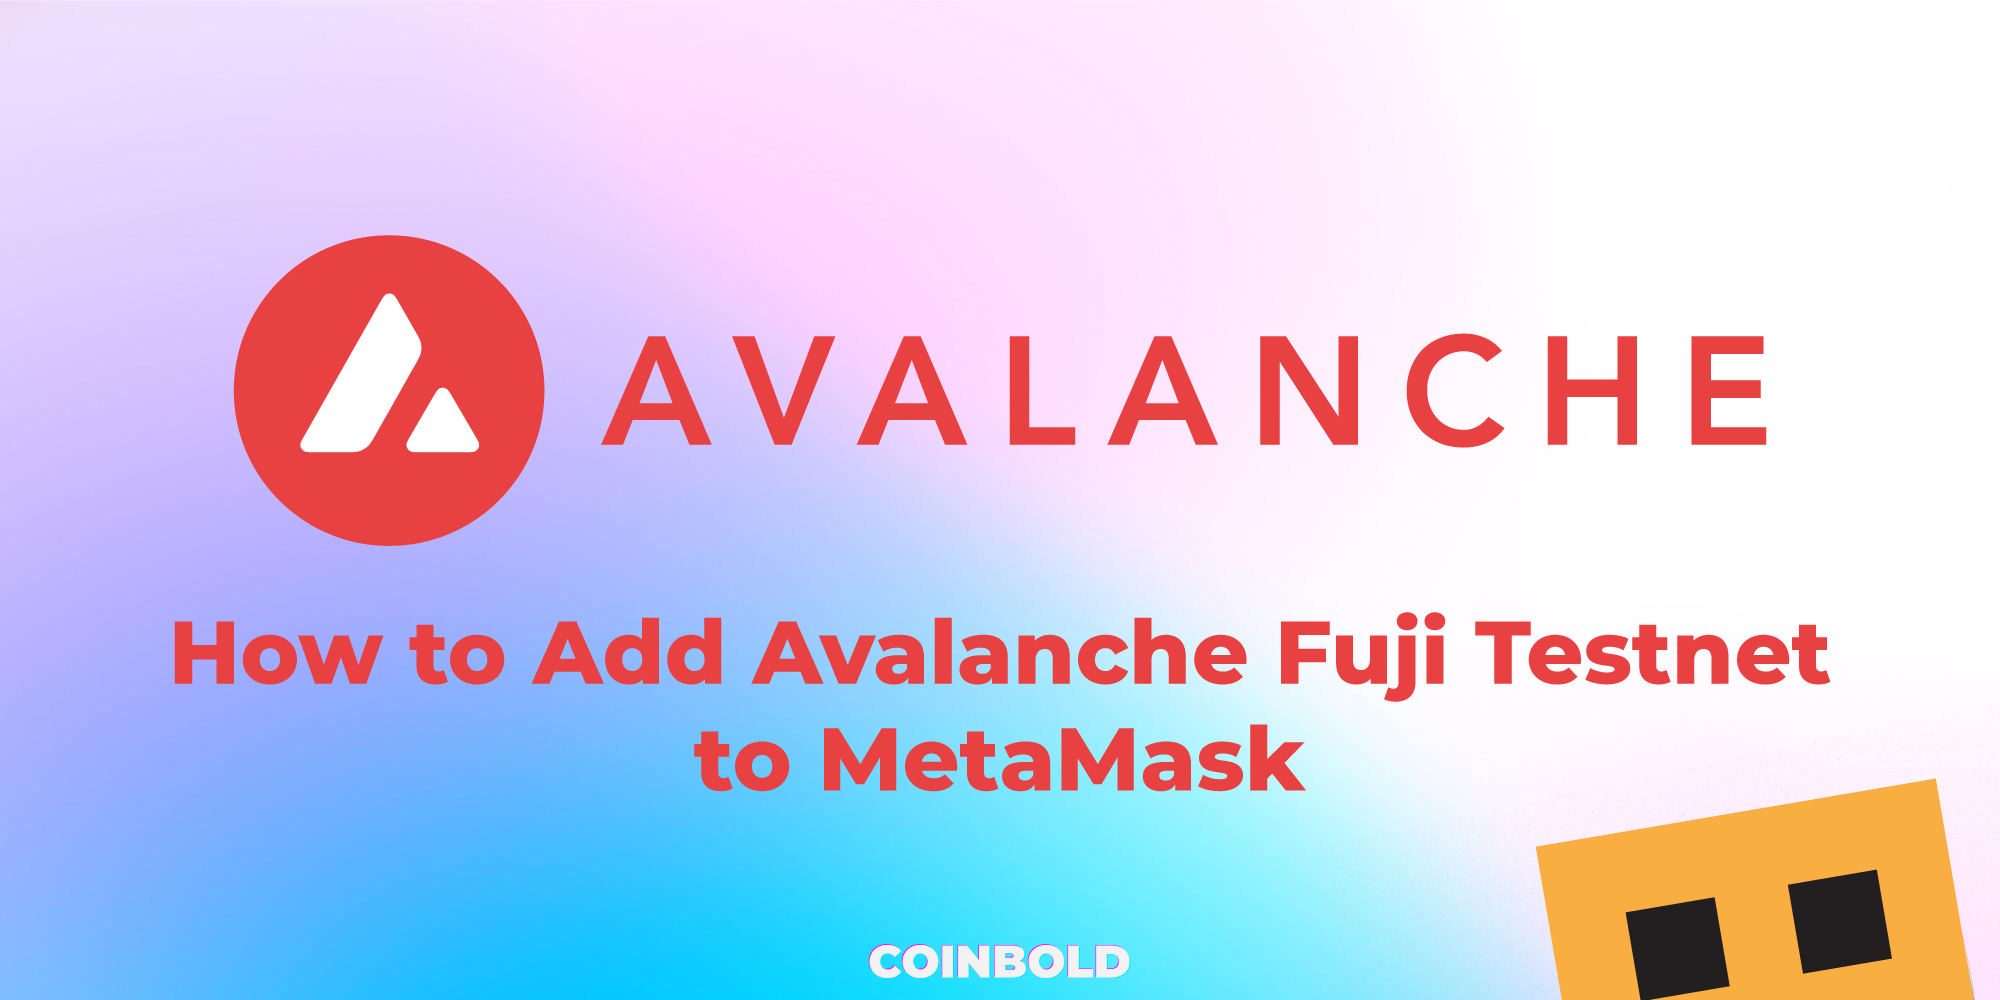 How to Add Avalanche Fuji Testnet to MetaMask